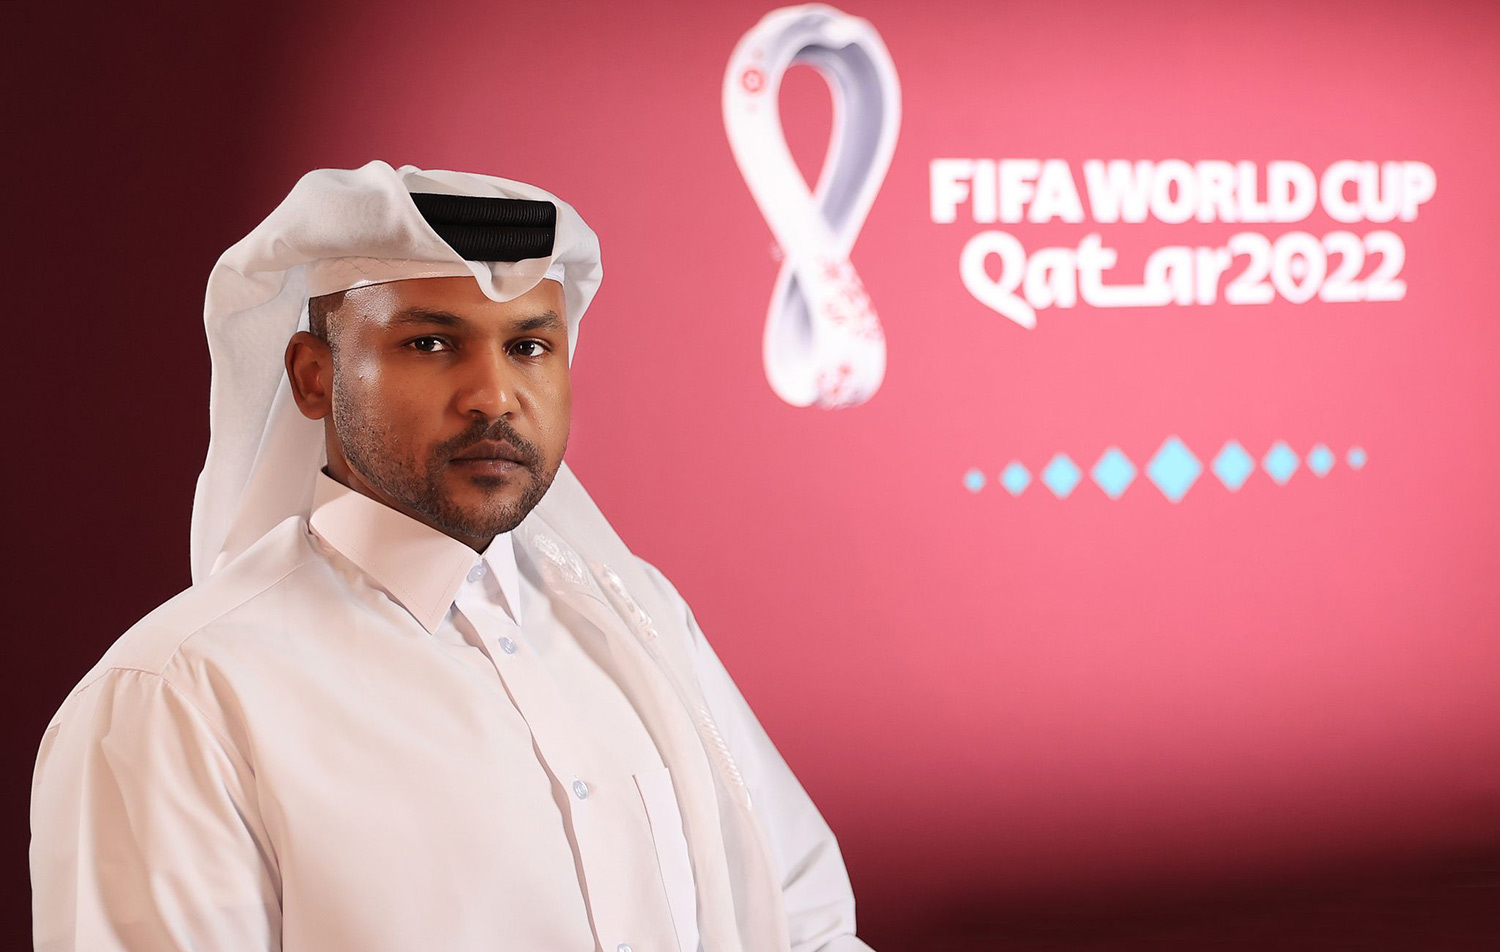 showcase your talents during FIFA World Cup Qatar